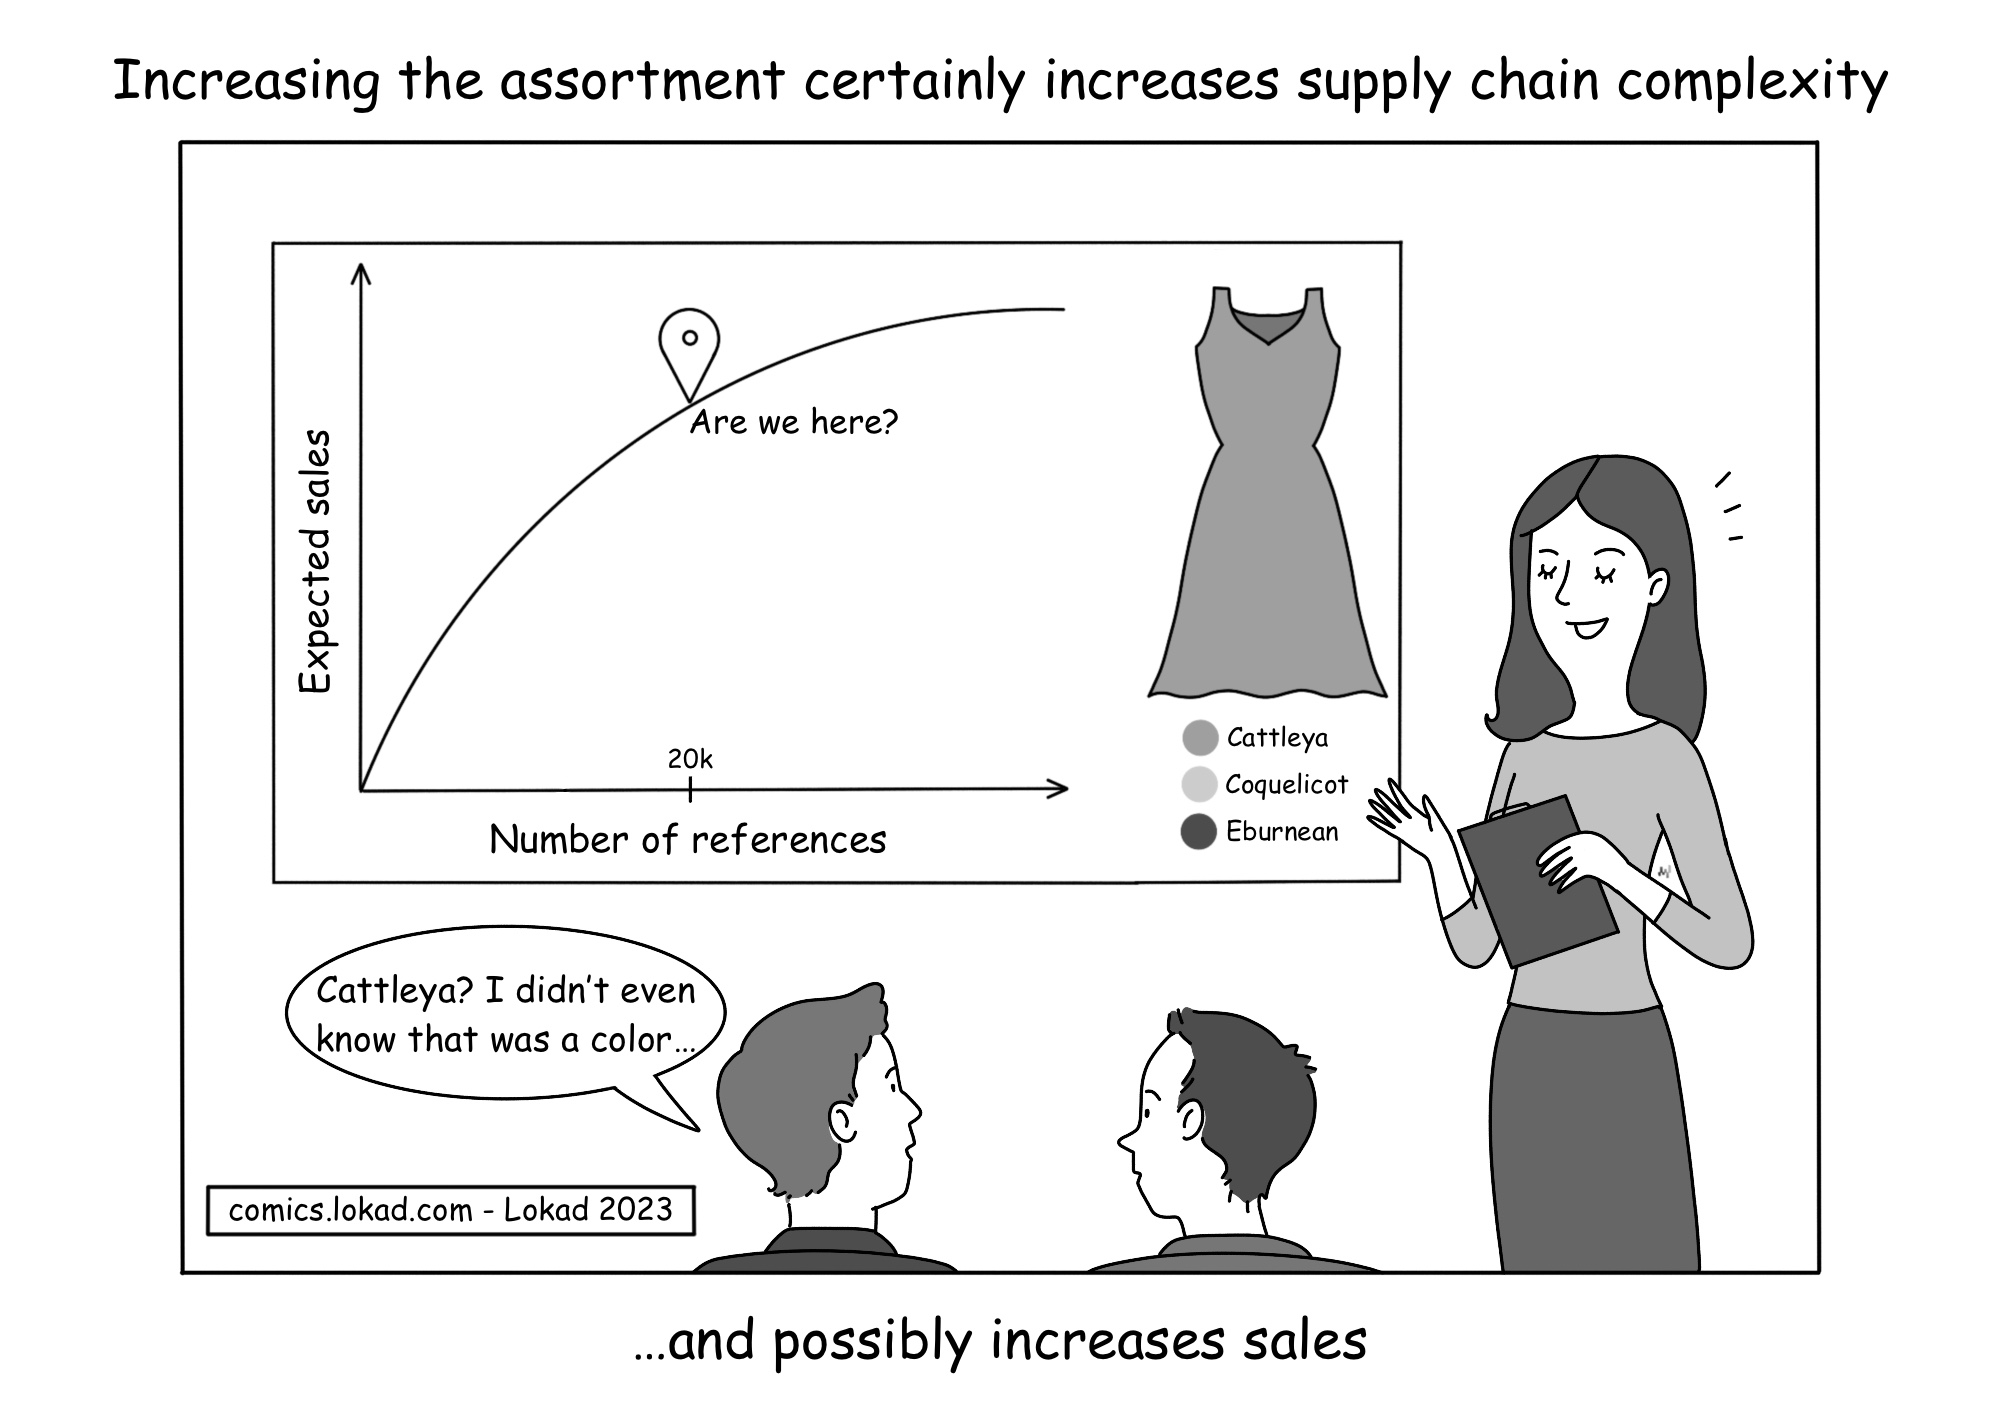 Increasing the assortment certainly increases supply chain complexity